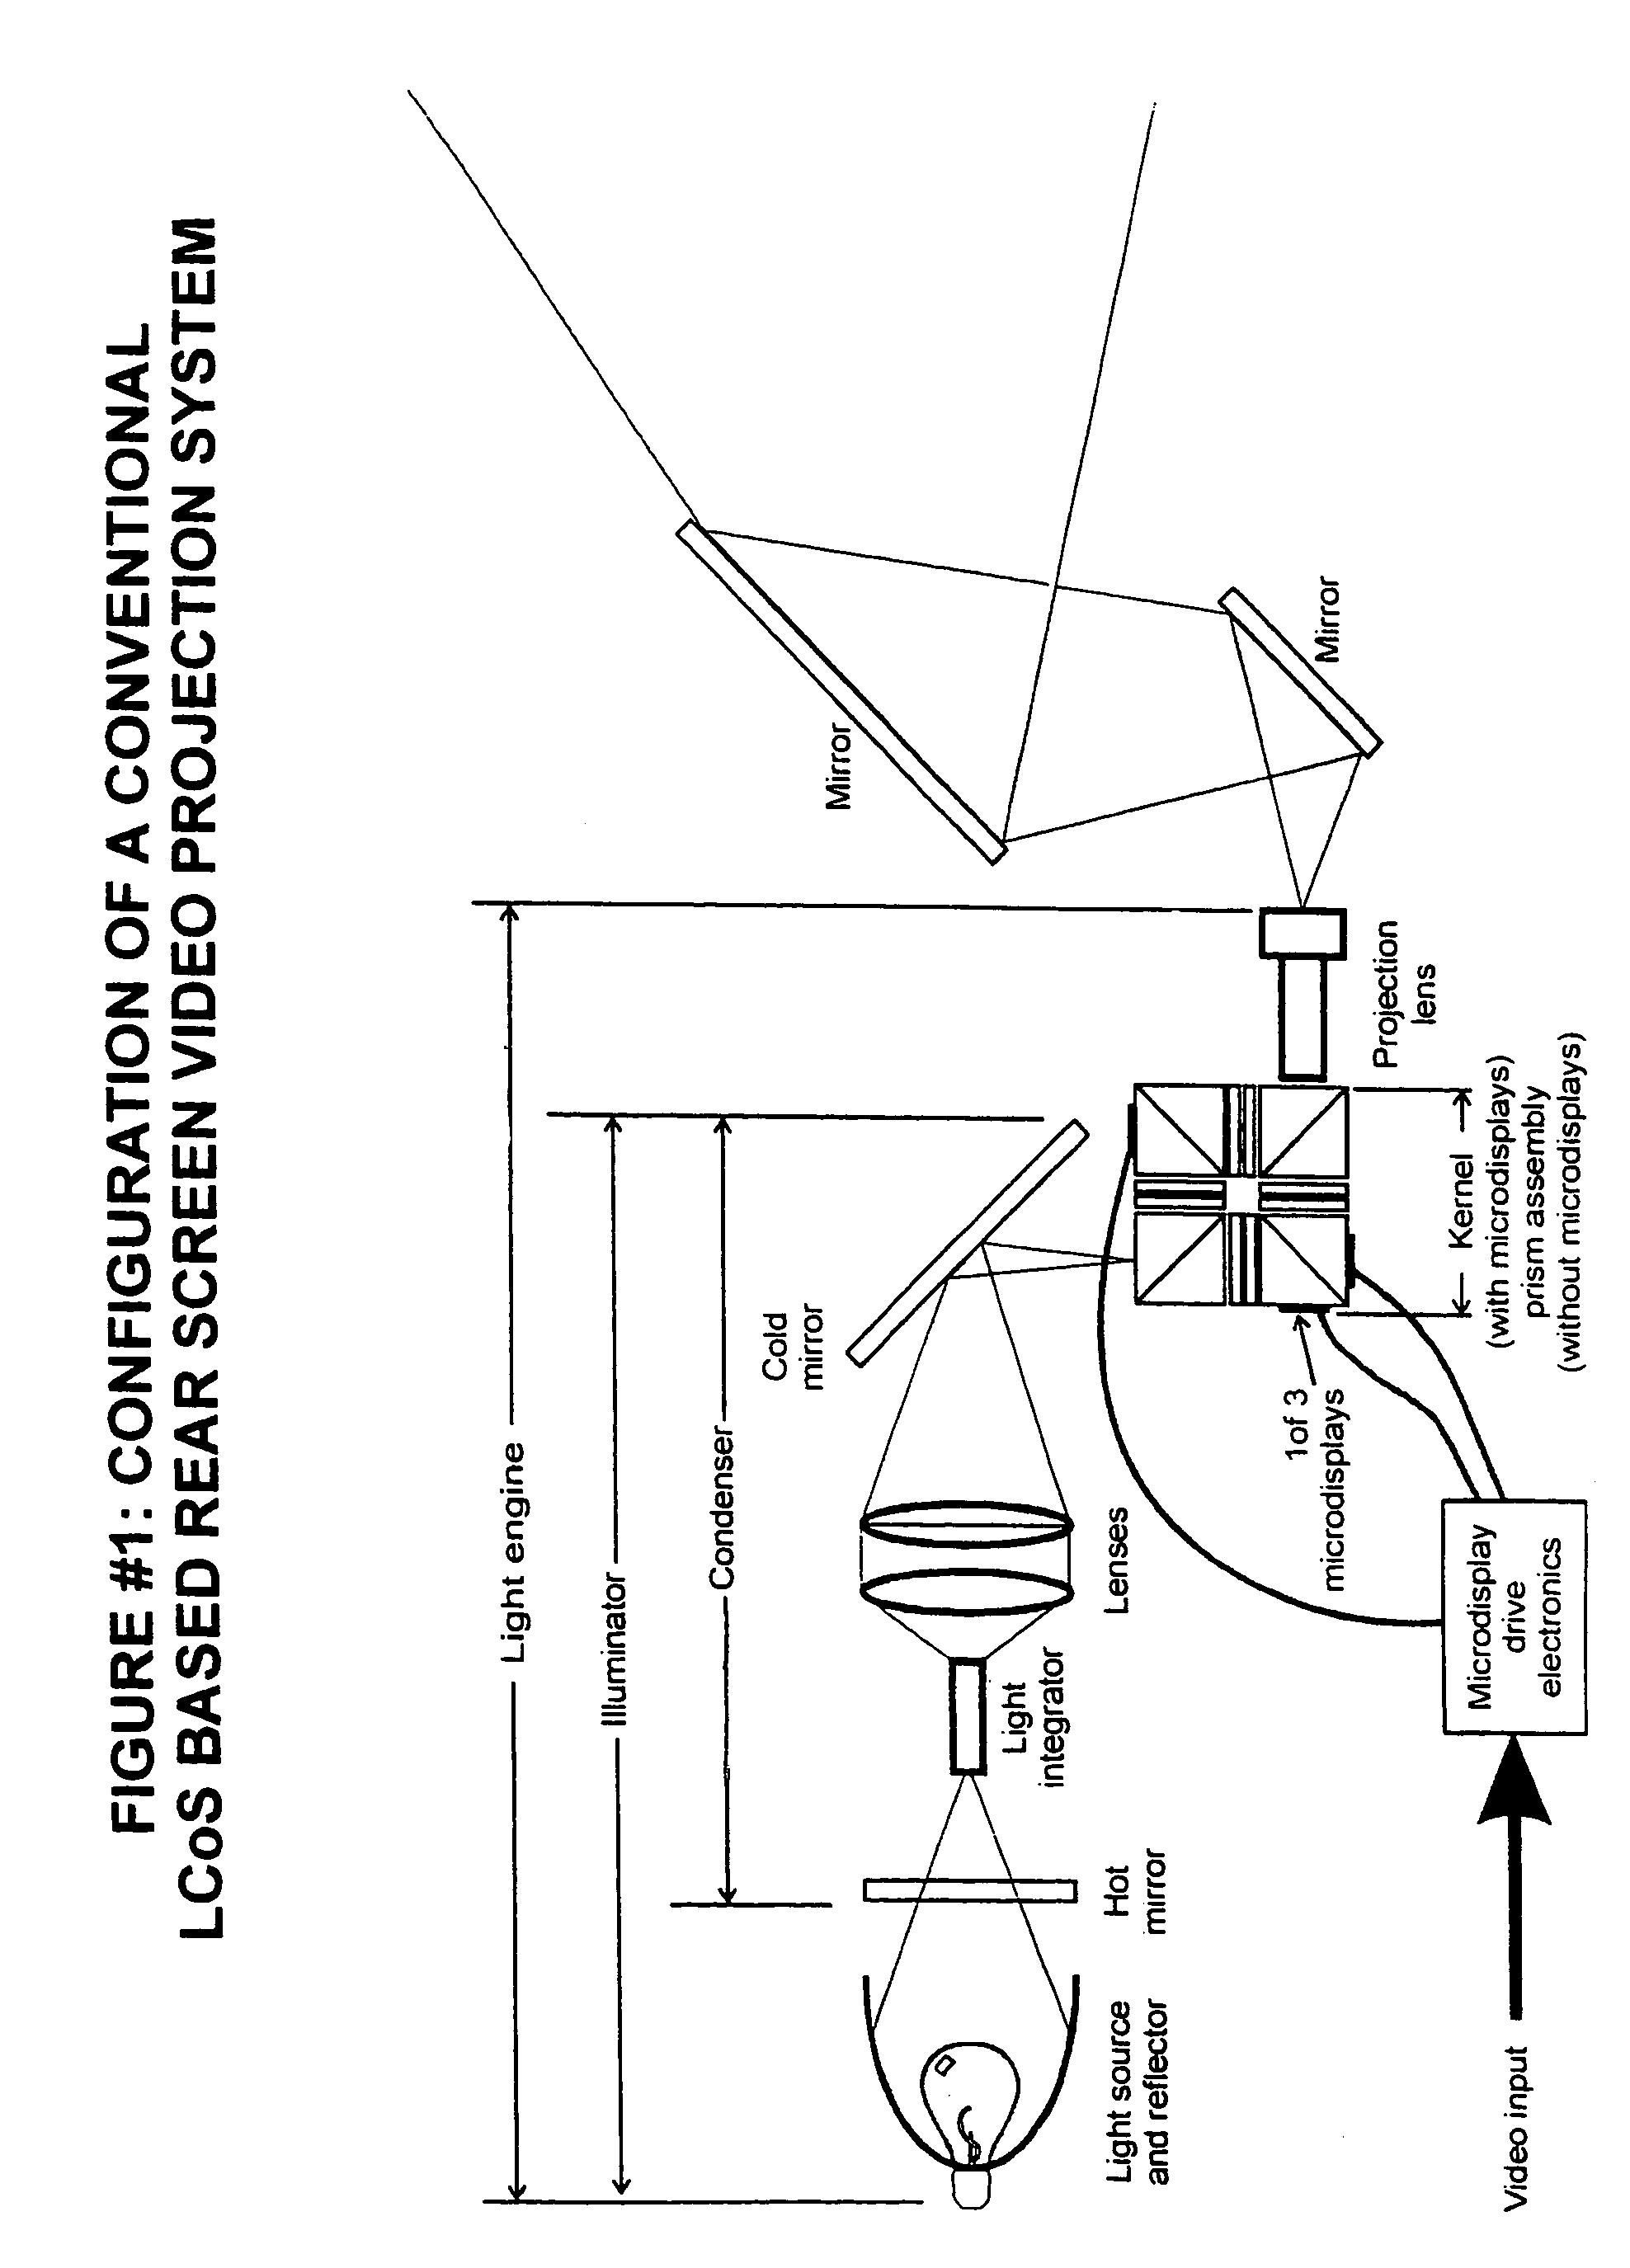 Method and apparatus to increase the contrast ratio of the image produced by a LCoS based light engine